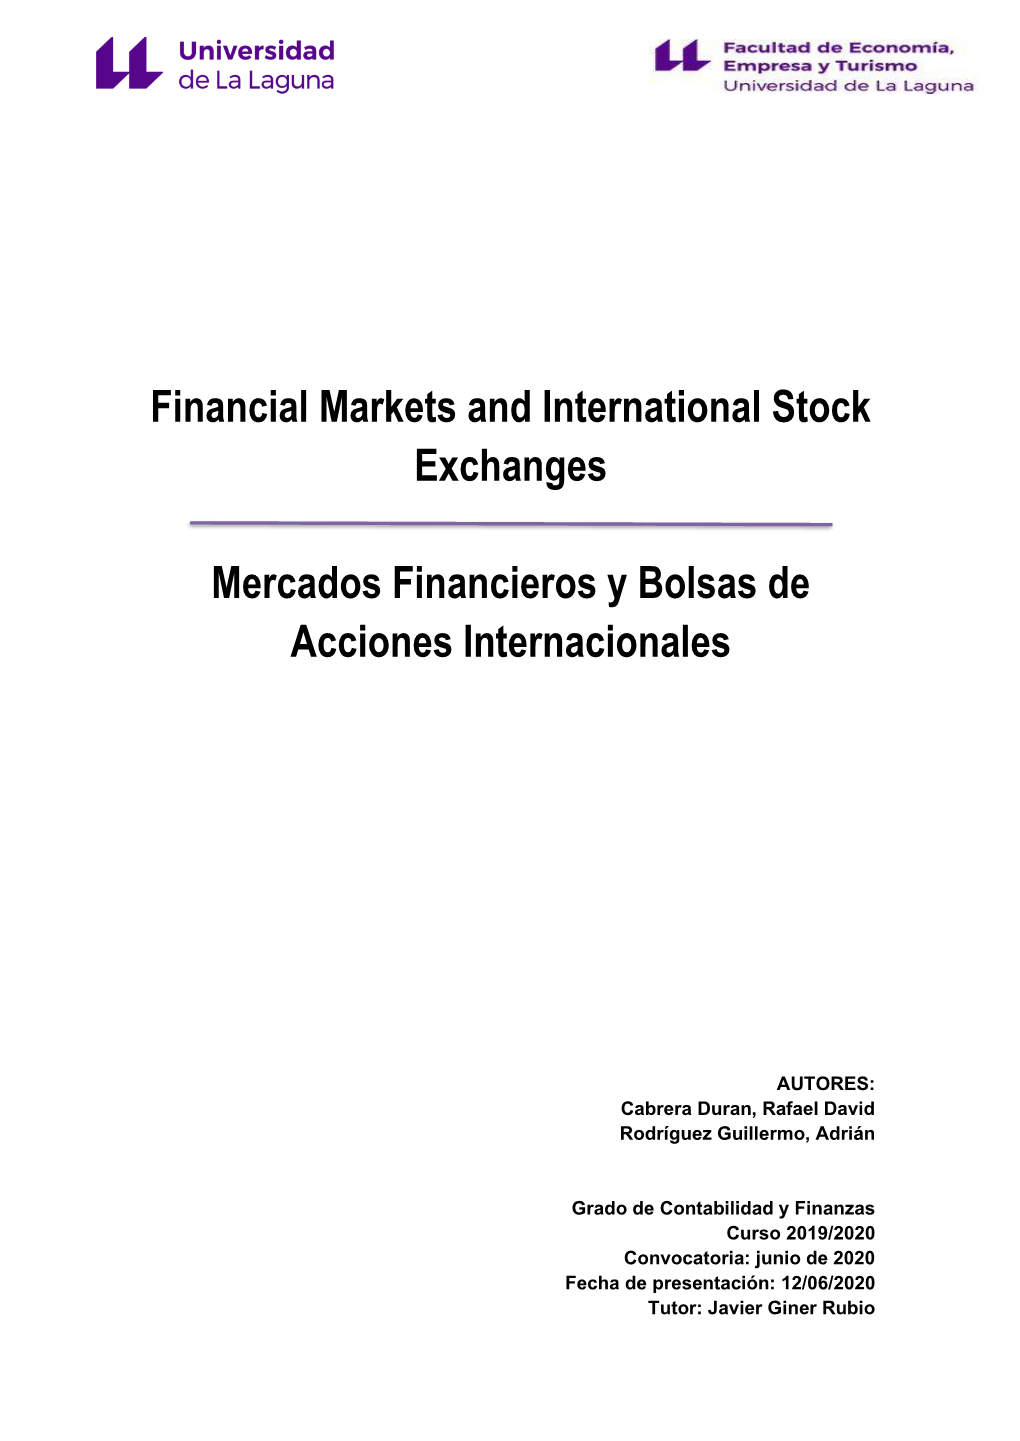 Financial Markets and International Stock Exchanges Mercados